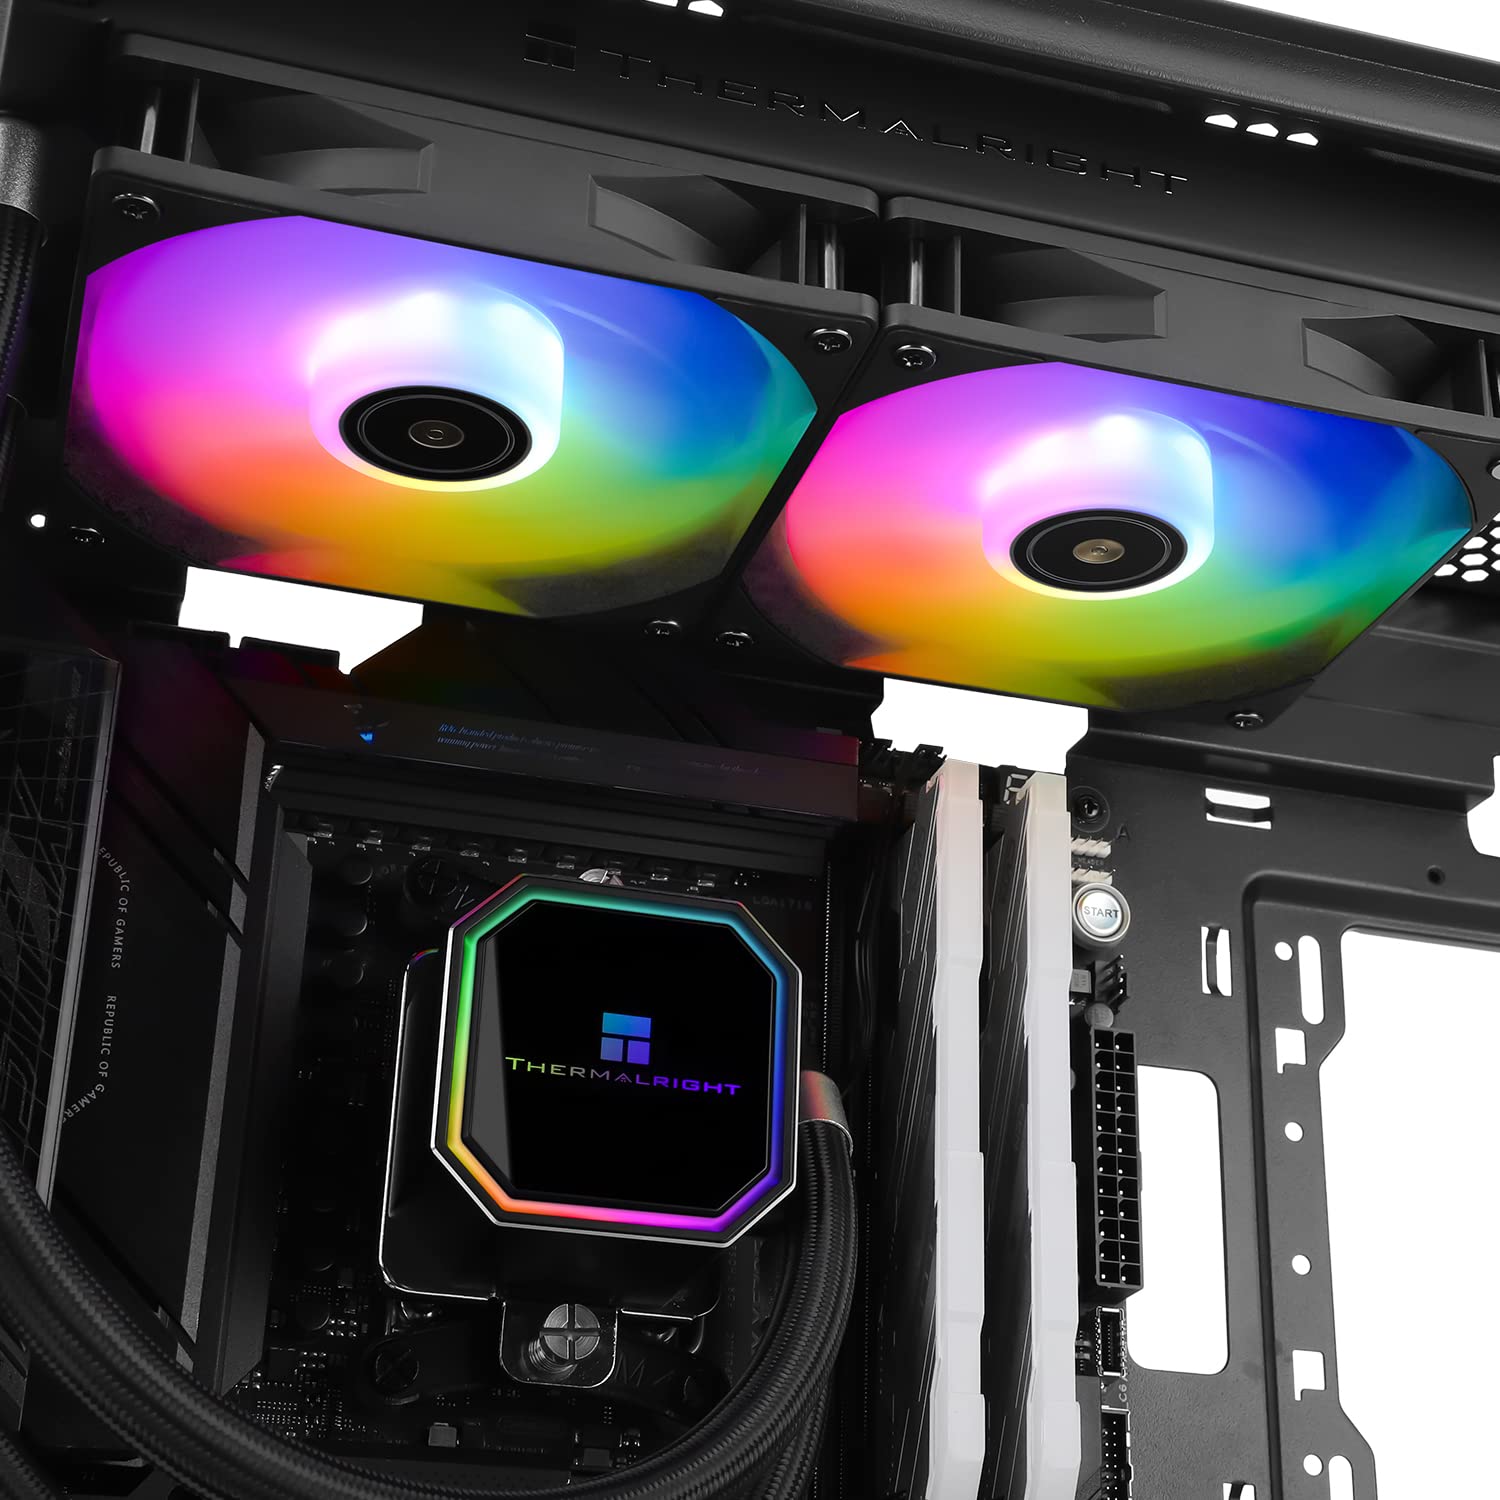 Thermalright Frozen Prism 240 Black ARGB Liquid CPU Water Cooler with 120mm ARGB PWM Fan,240 Black Cold Row Specification, Computer Water Cooler for AMD/AM4/AM5,Intel LGA1700/1150/1151/1200/2011